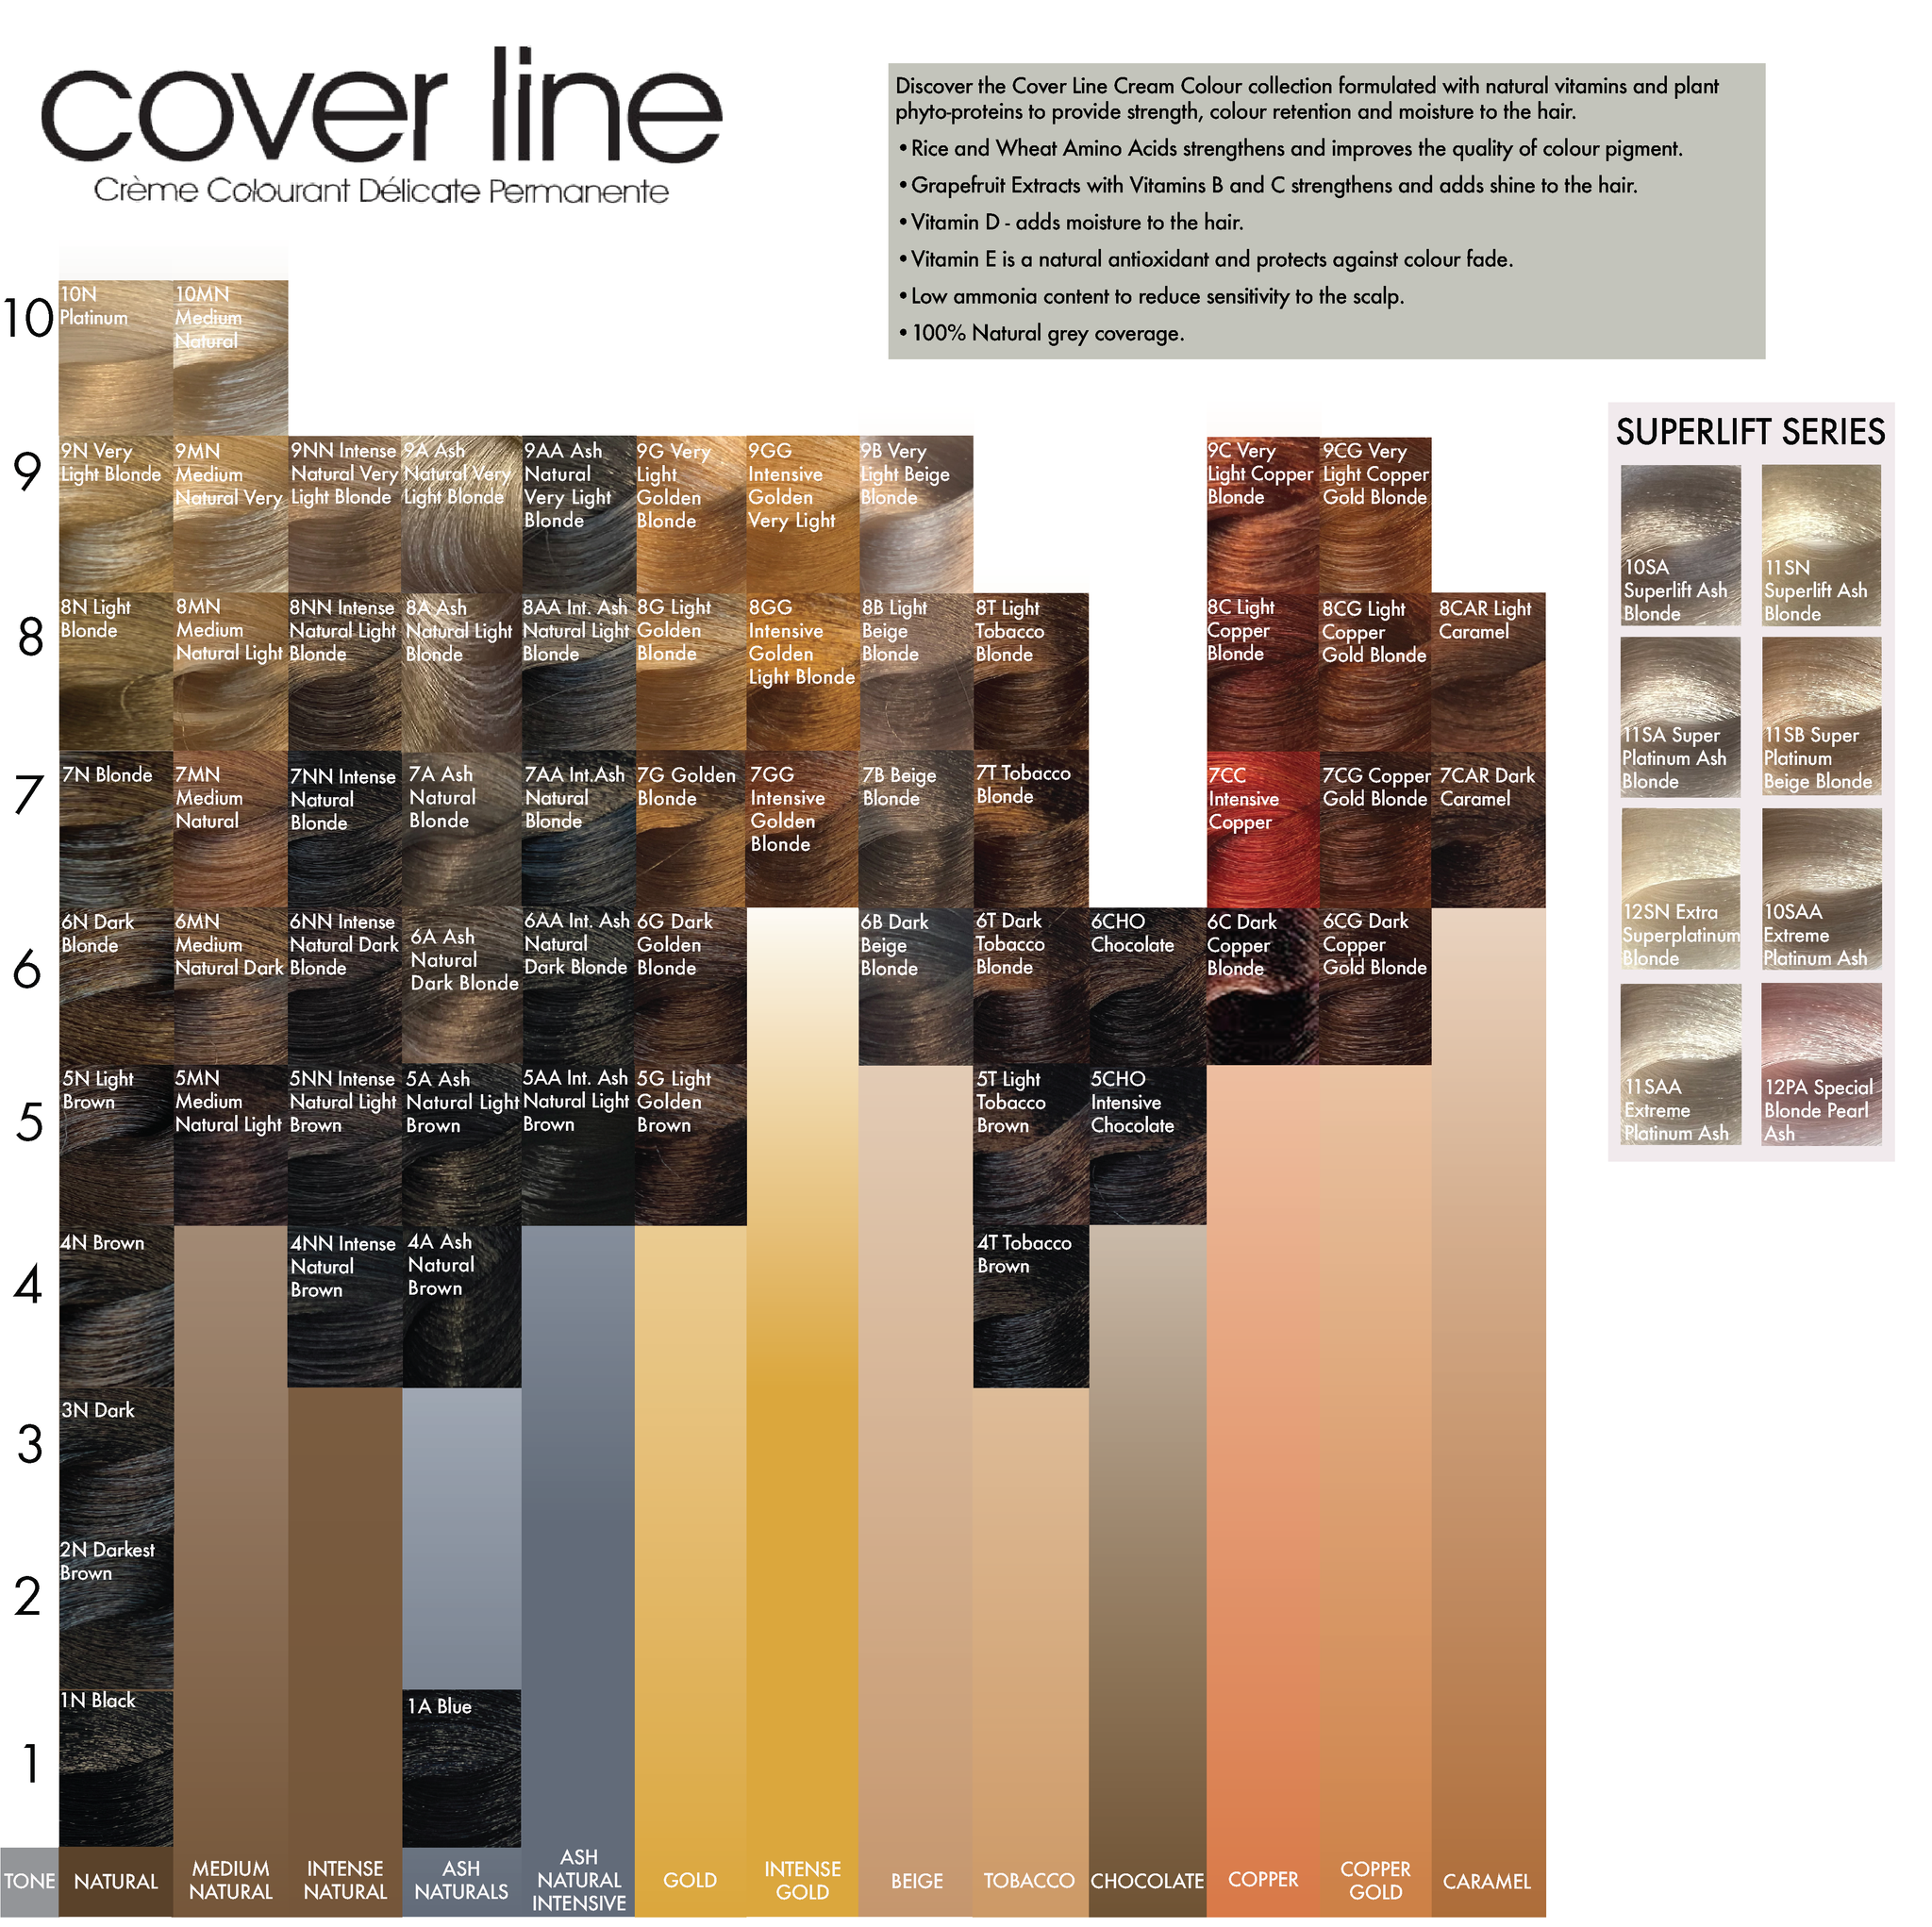 Coverline 9AA (9.11) Intensive Ash Natural Very Light Blonde 100ml 